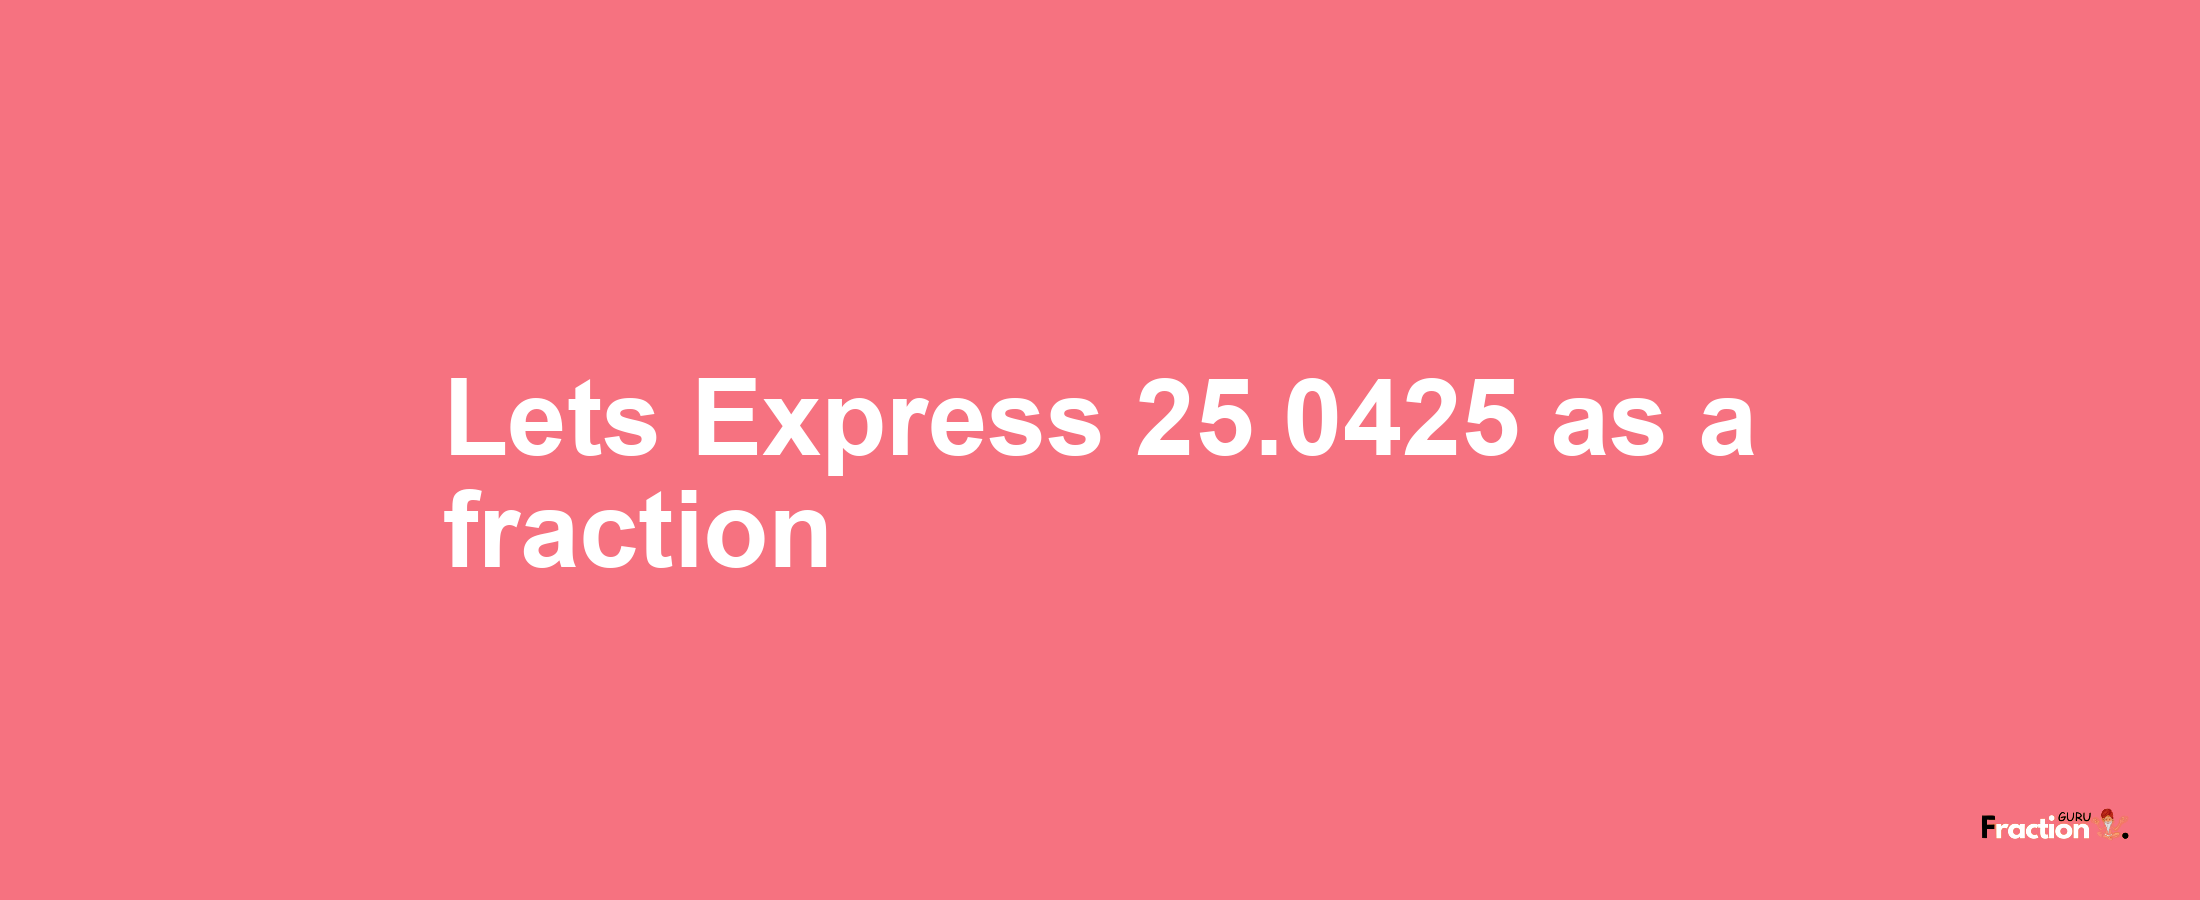 Lets Express 25.0425 as afraction